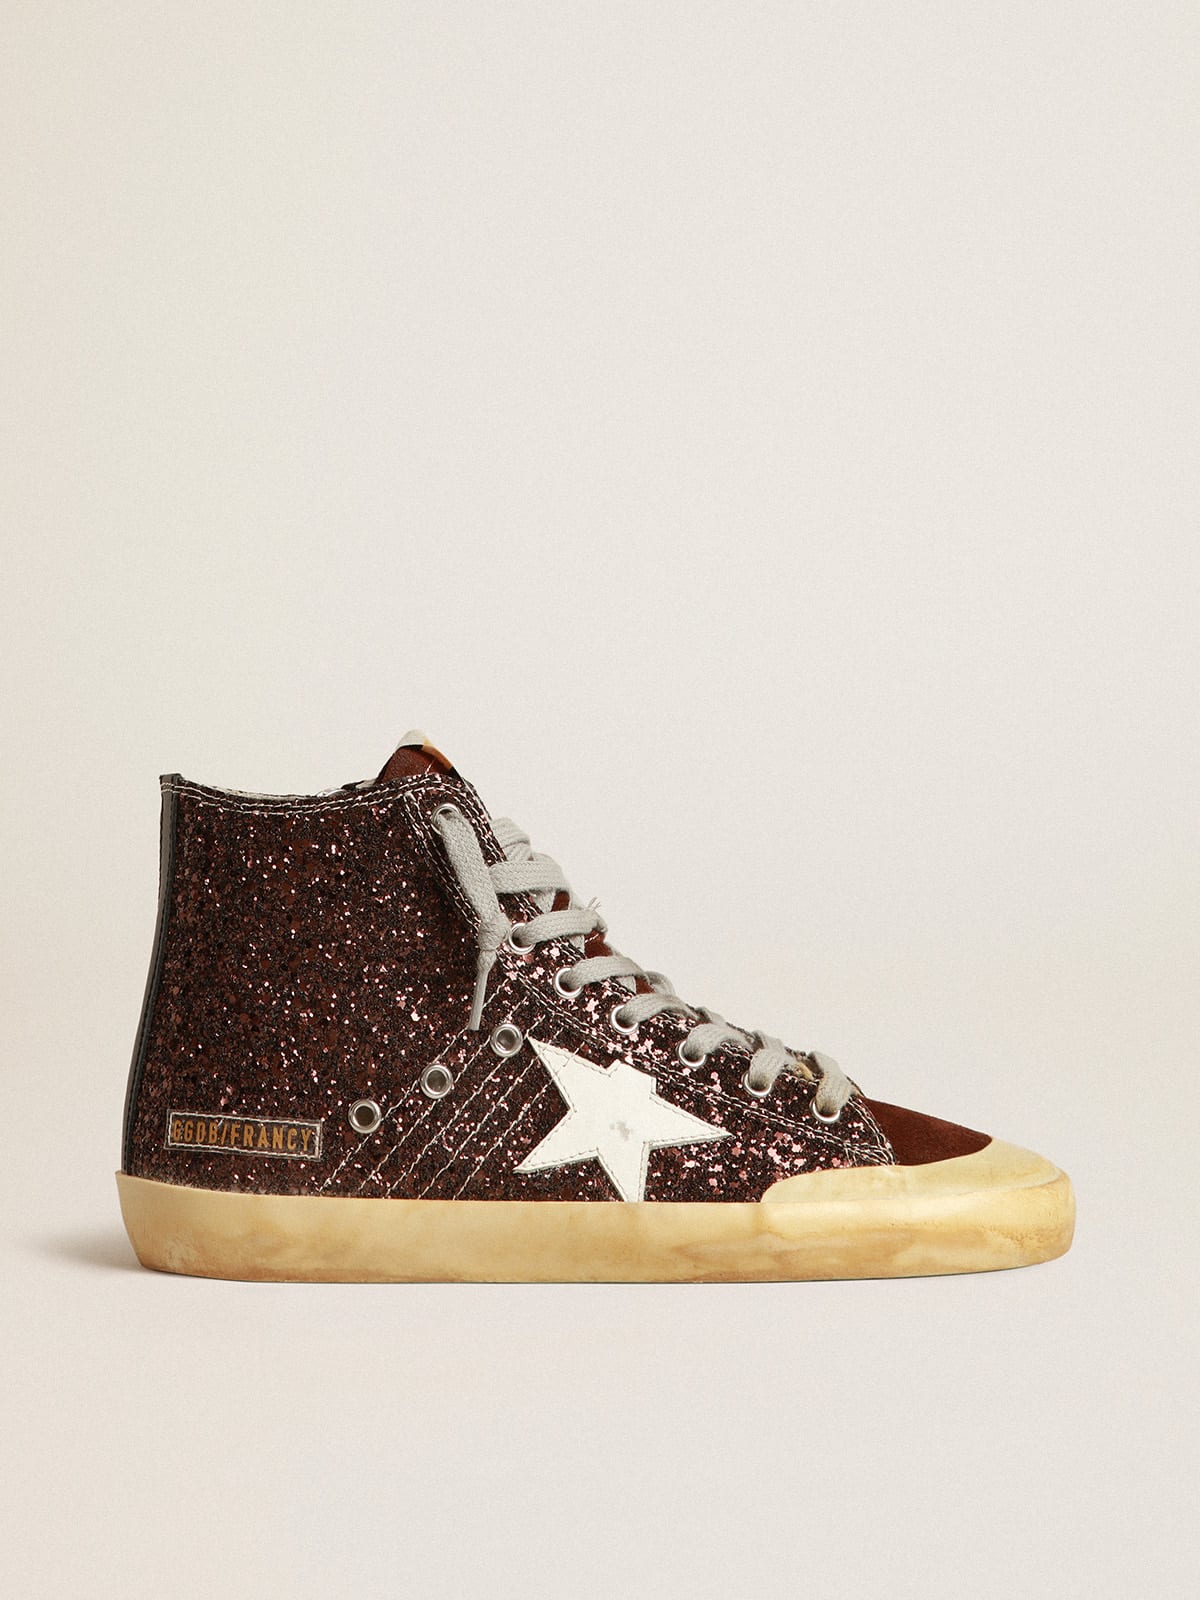 Golden Goose - Francy Penstar in brown glitter with white leather star in 